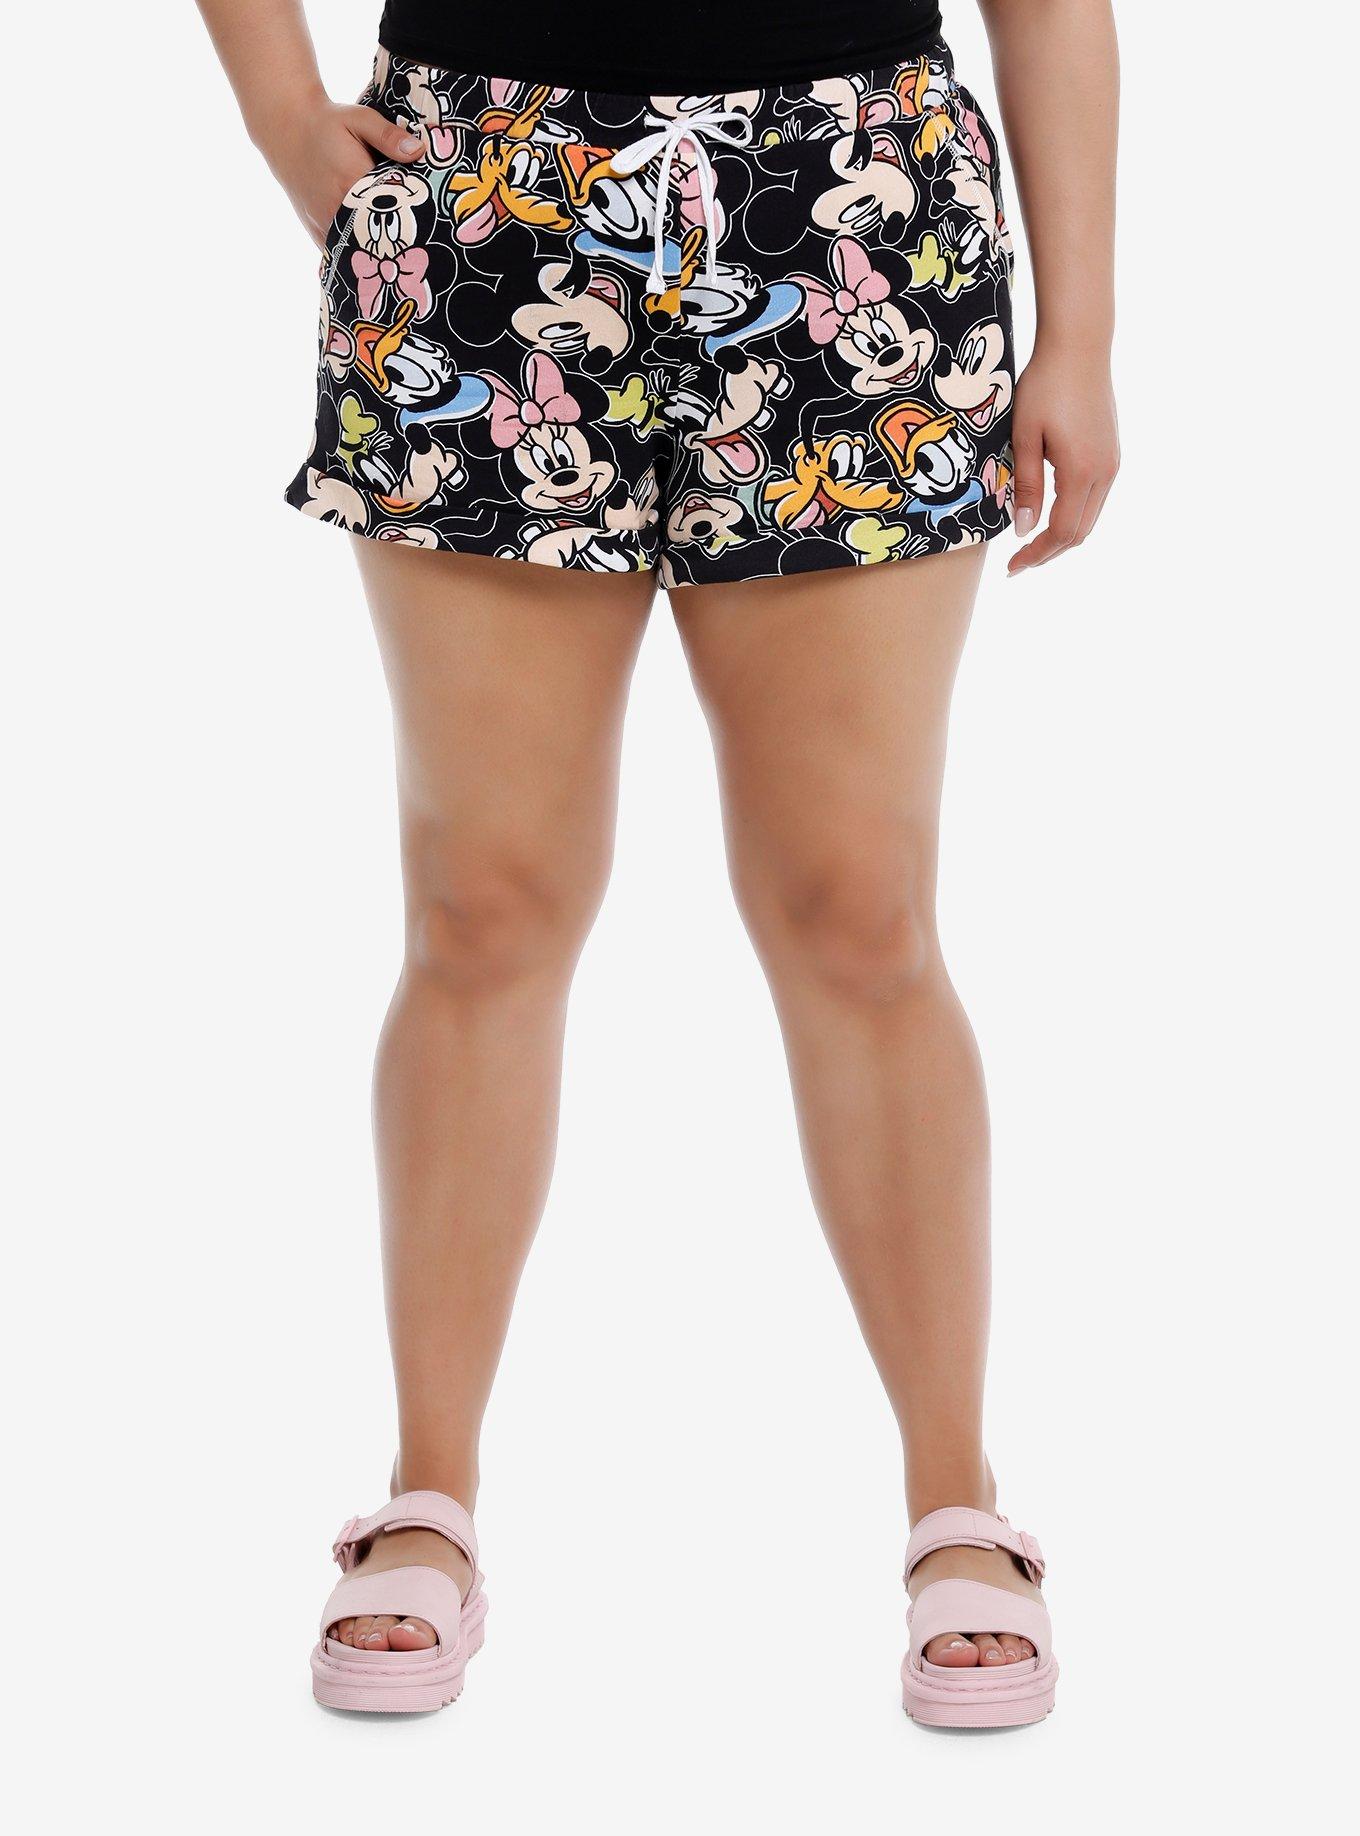 Disney Mickey Mouse & Friends Girls Lounge Shorts Plus Size, MULTI, hi-res